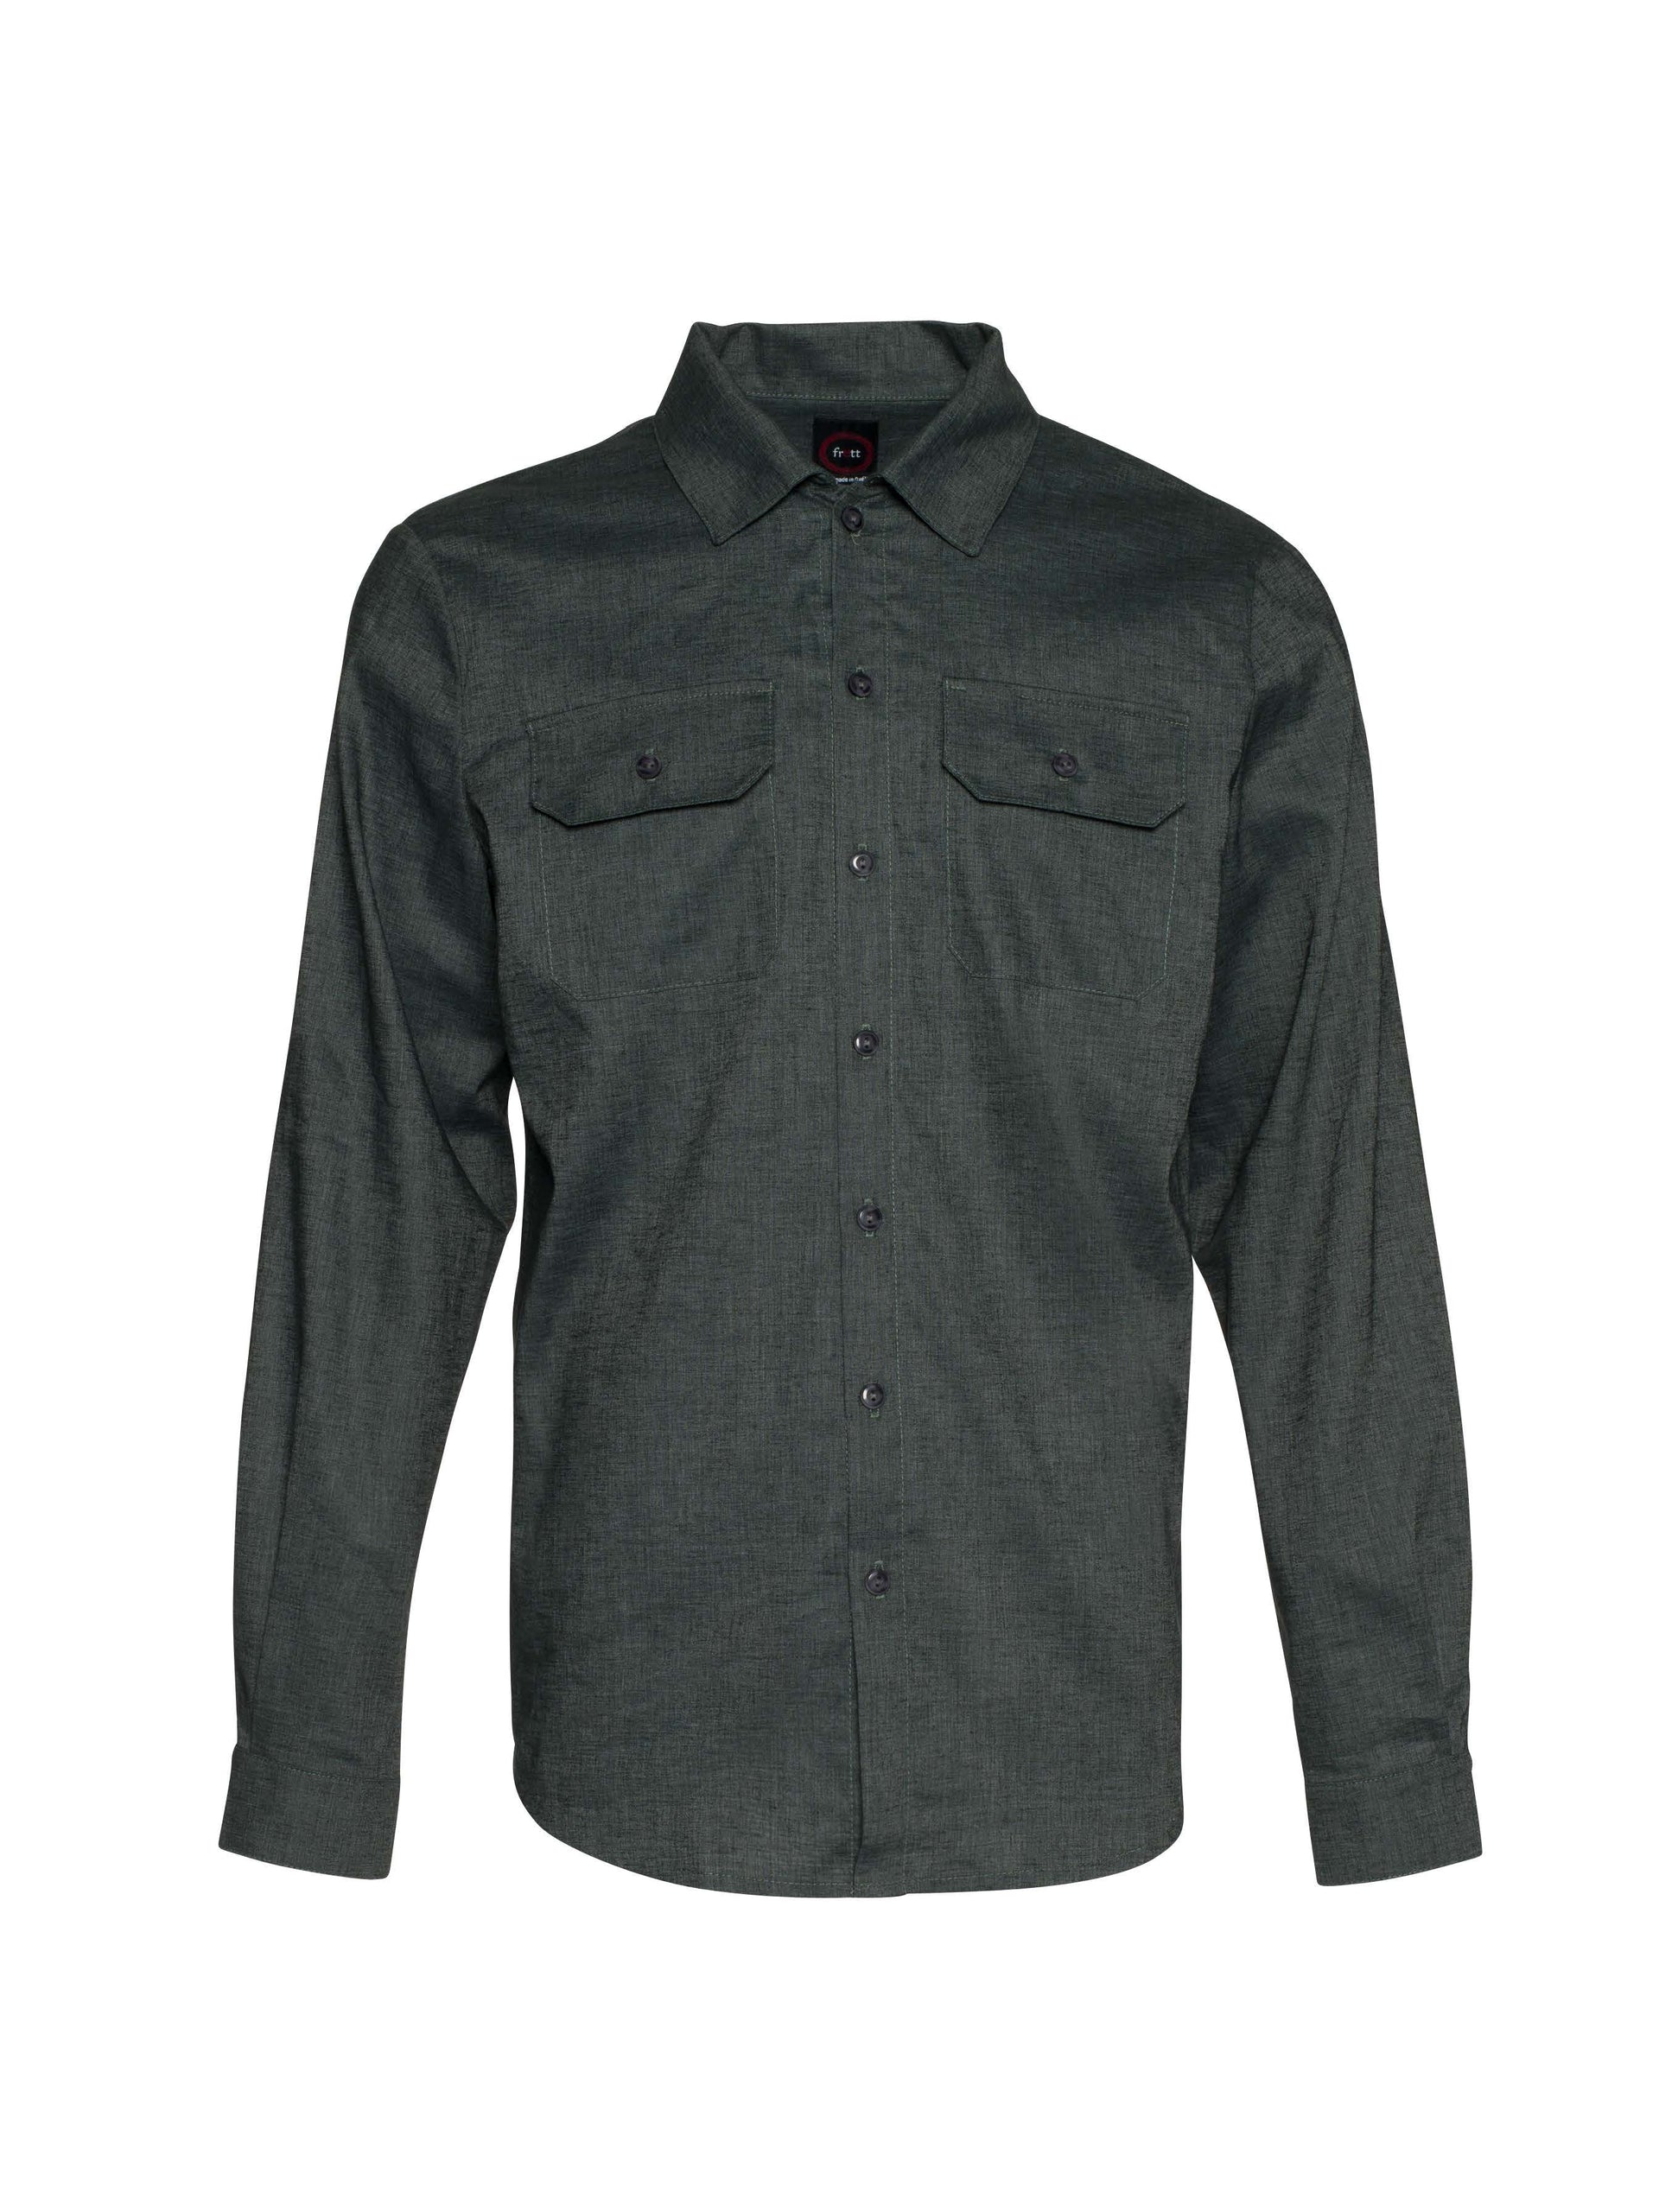 Chemise-MECANO-Chanvre poly recycle-Charcoal-Homme-ghost-FC101b